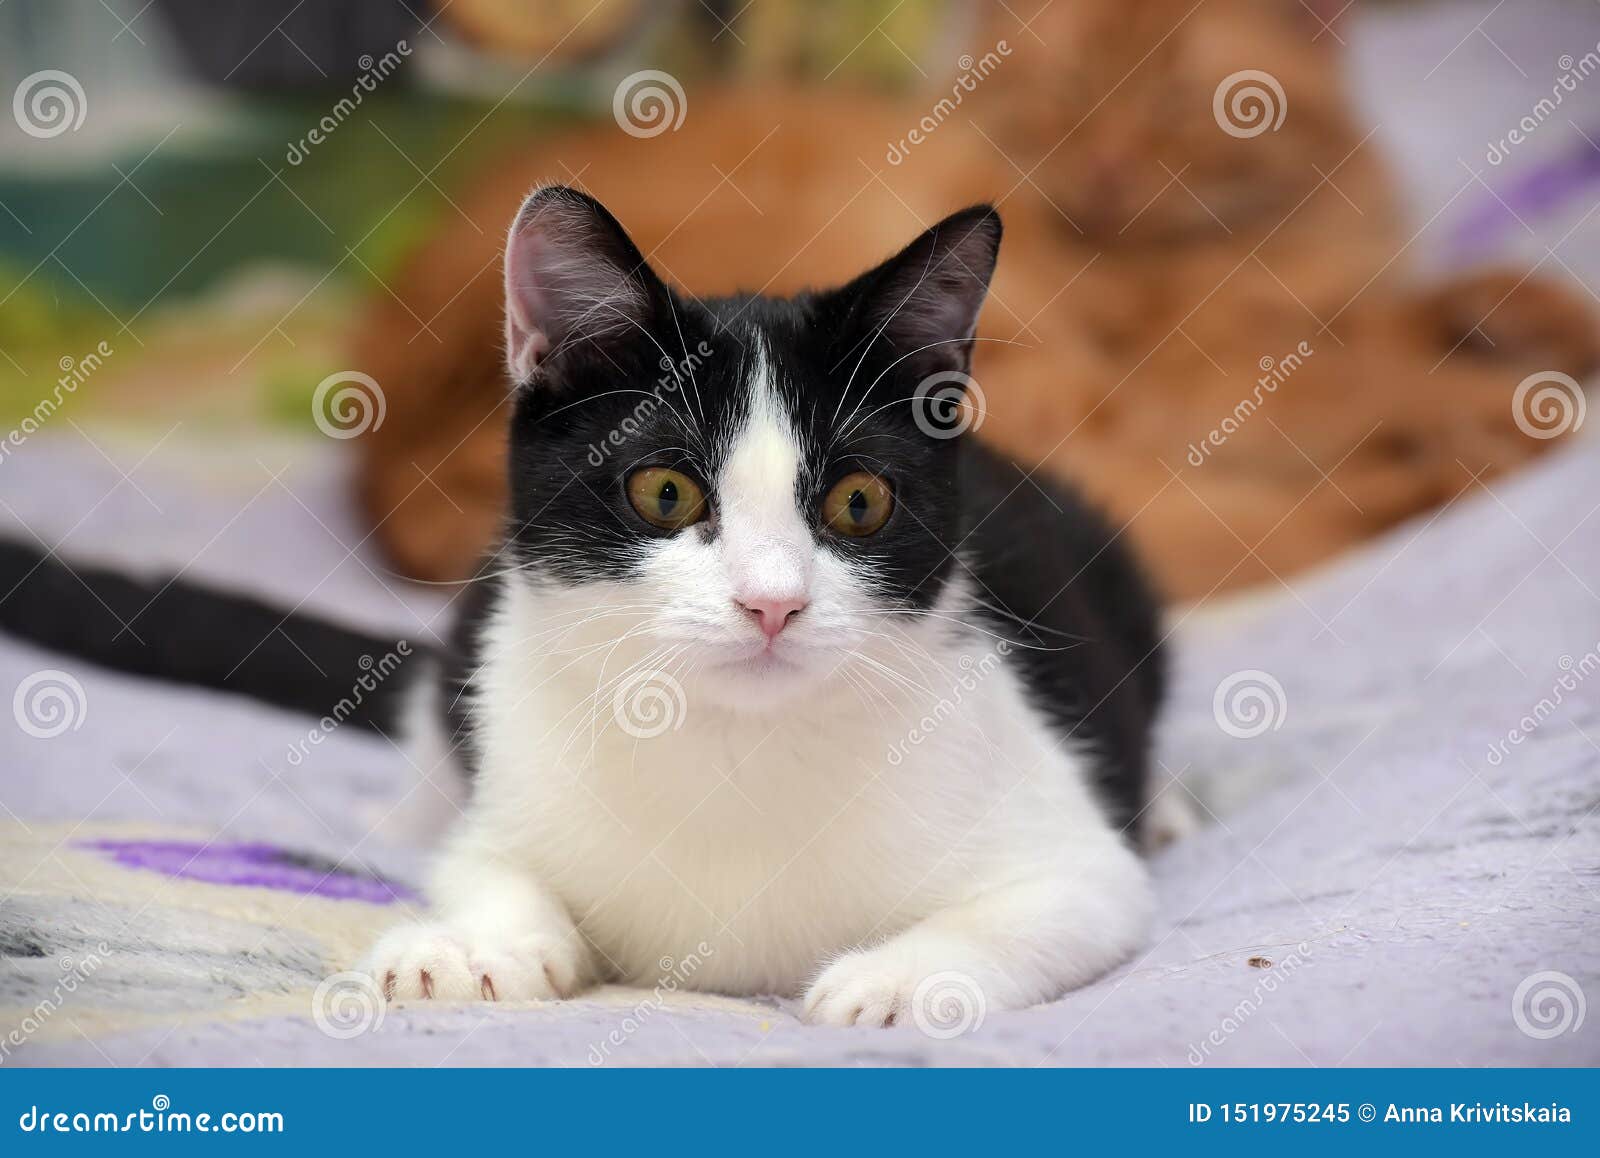 Young Black And White Cat European Shorthair Stock Image Image Of Adorable Head 151975245